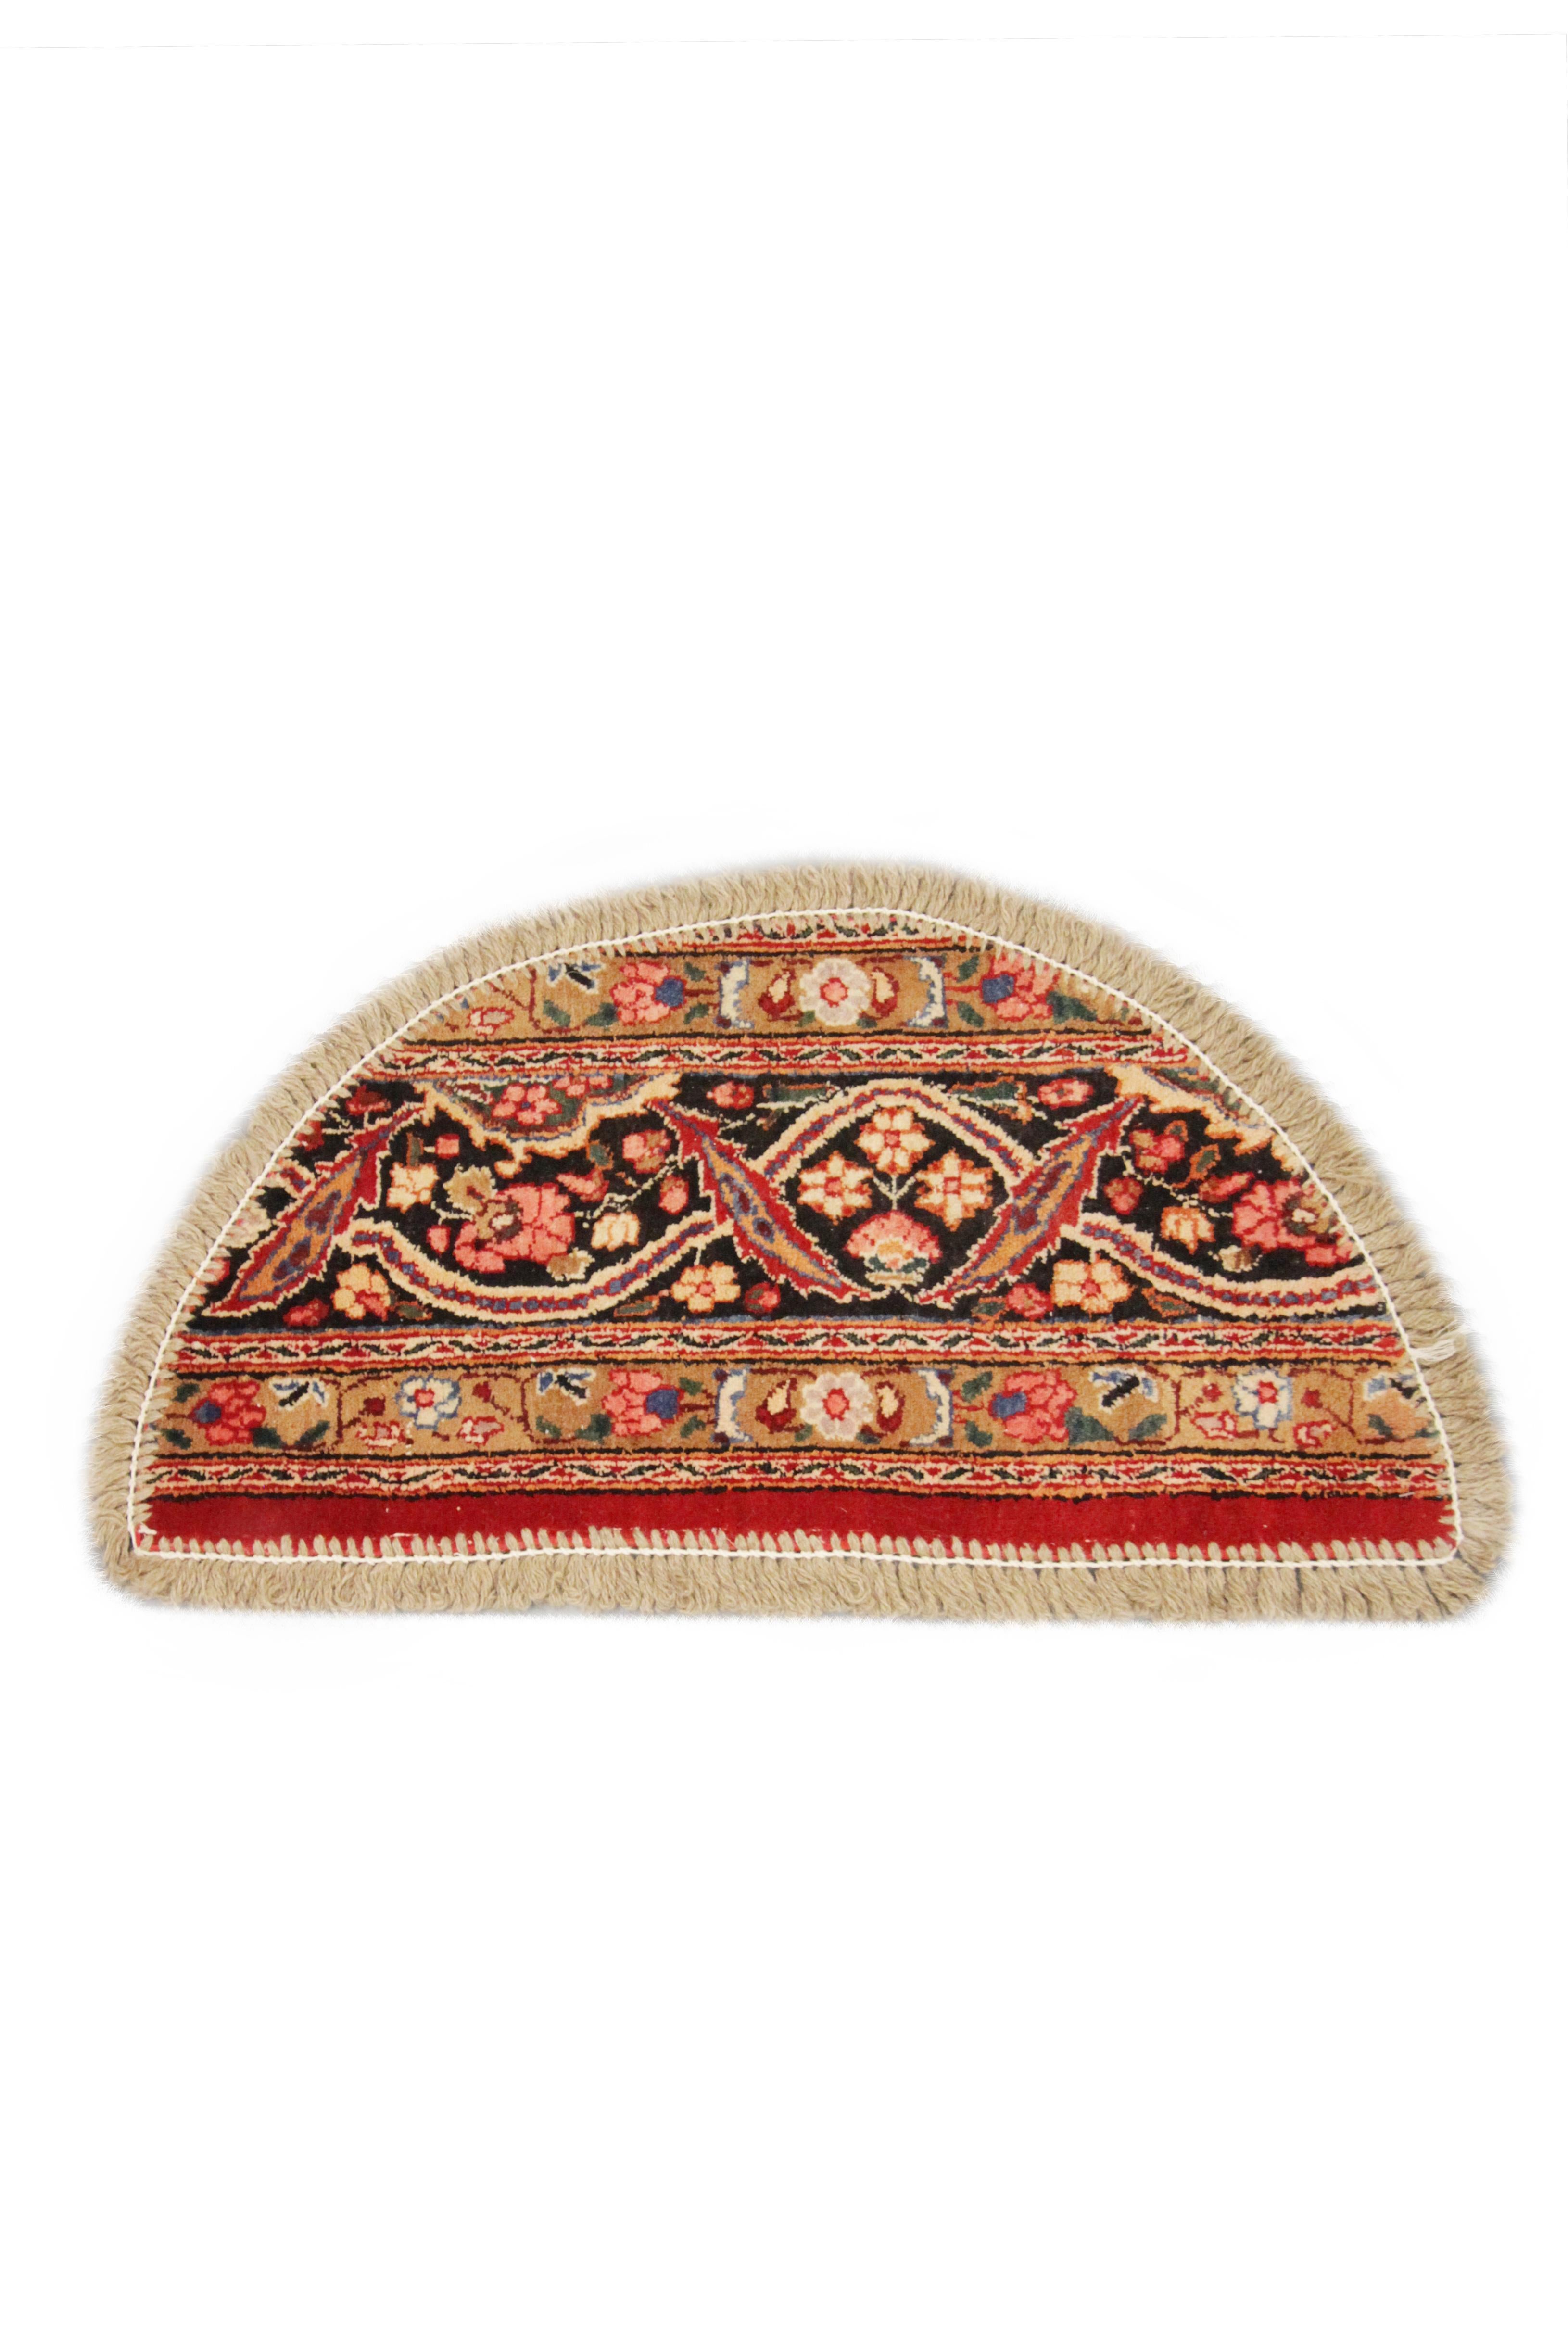 This handmade carpet high-quality doormat features a multilayered floral pattern with a mixture of contrasting and harmonious colorways. Perfect for any traditional or modern interior. This semi-circle entranceway doormat has been refurbished from a